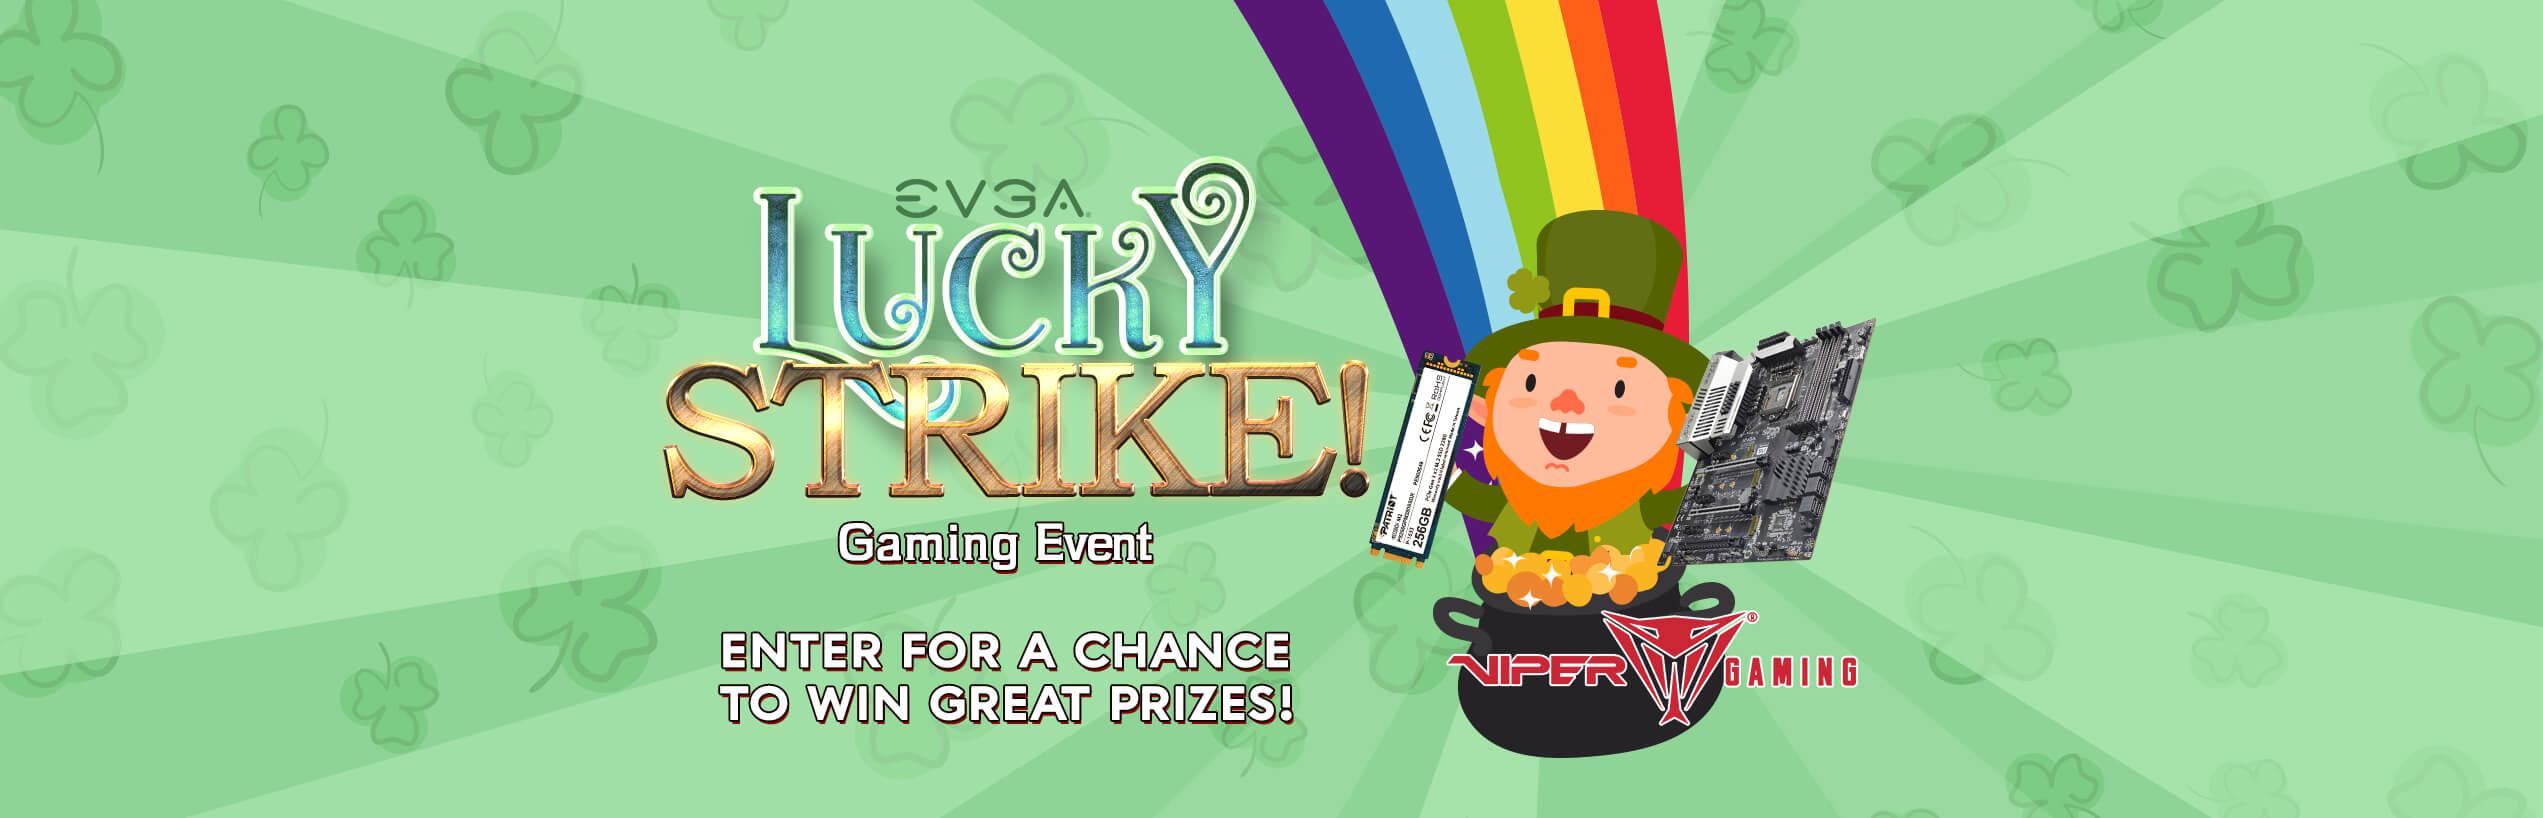 EVGA Lucky Strike Gaming Event!